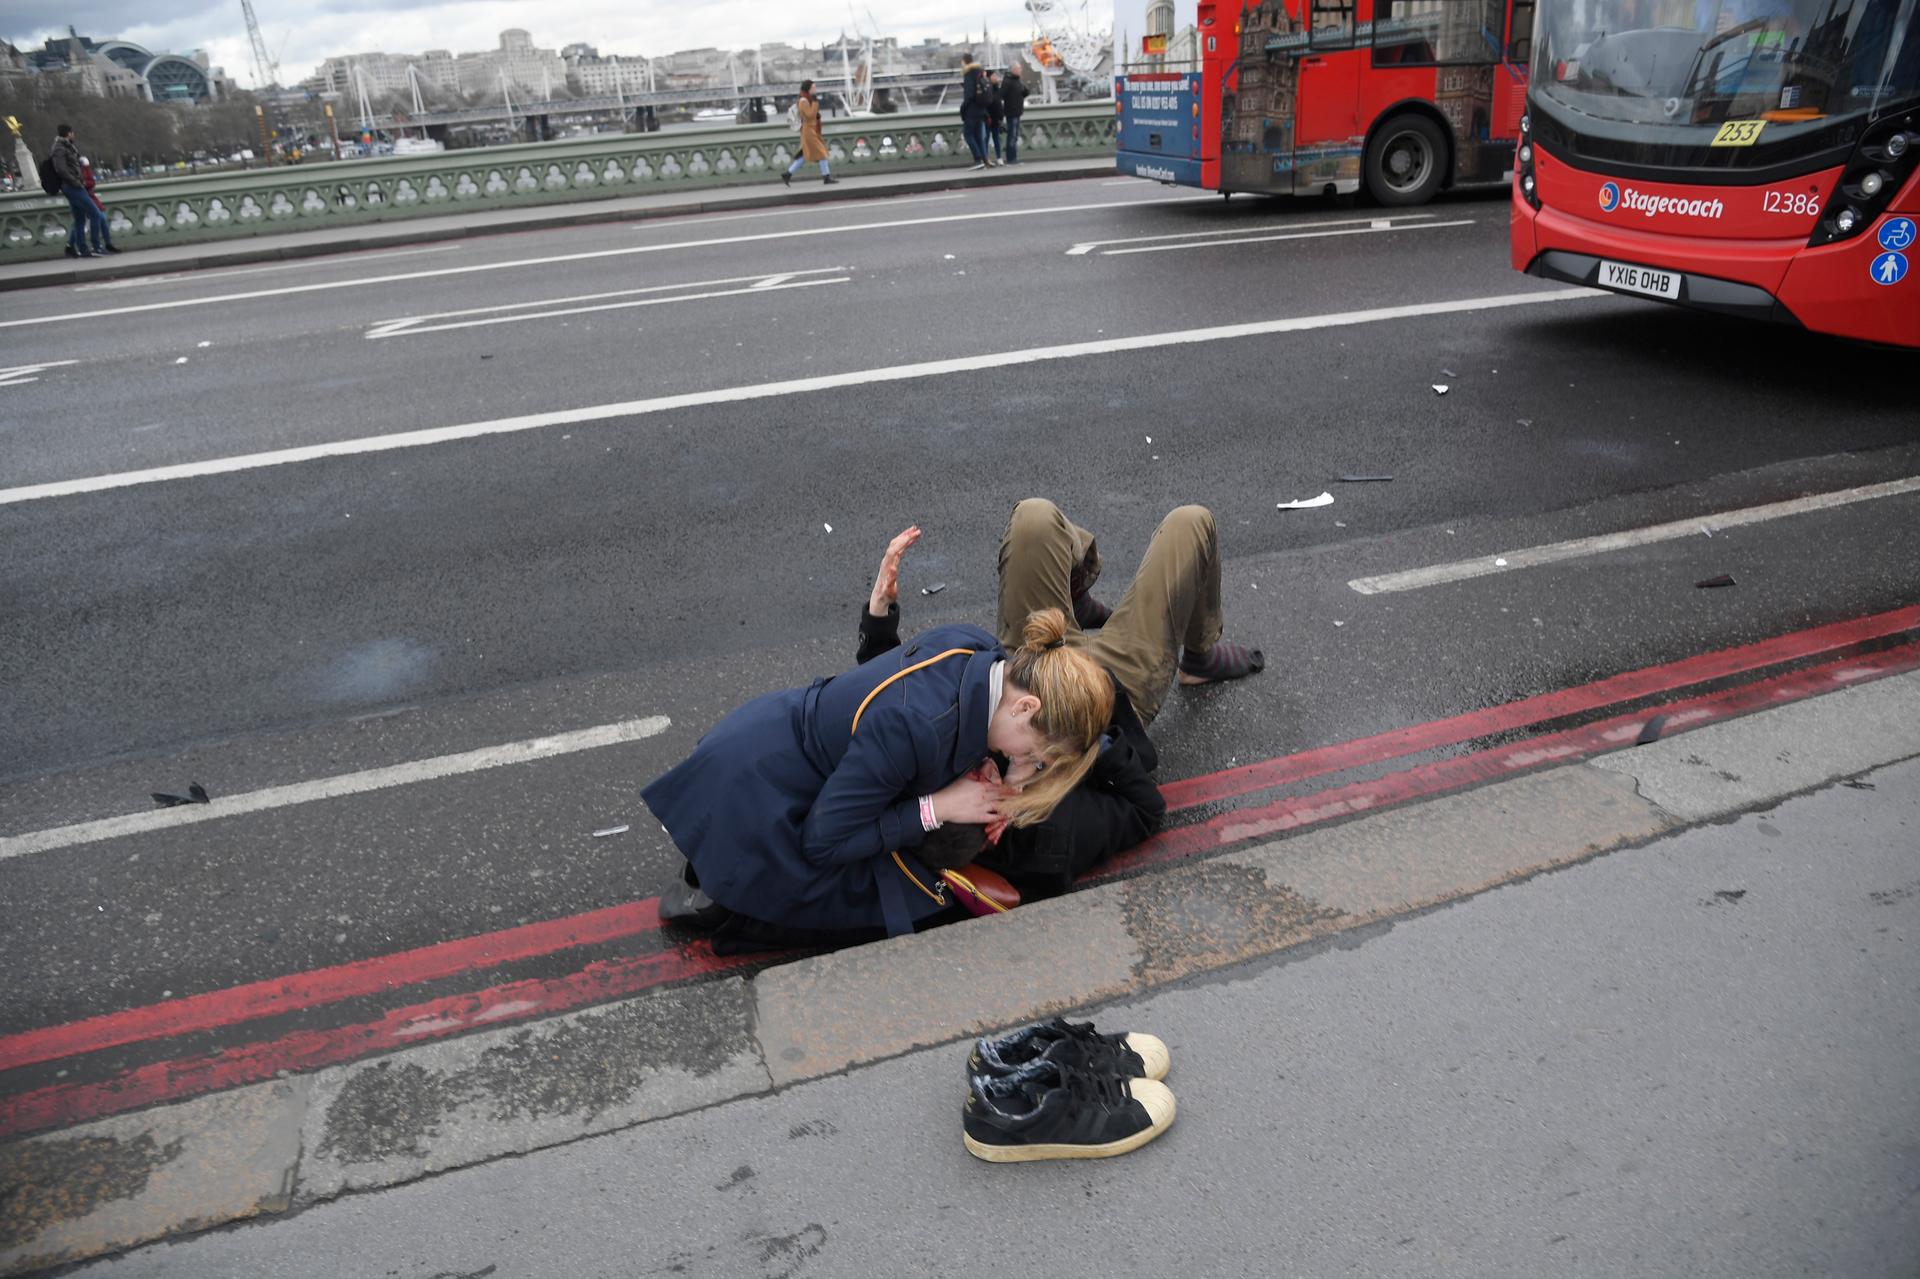 A woman assists an injured person after an incident on Westminster Bridge in London.